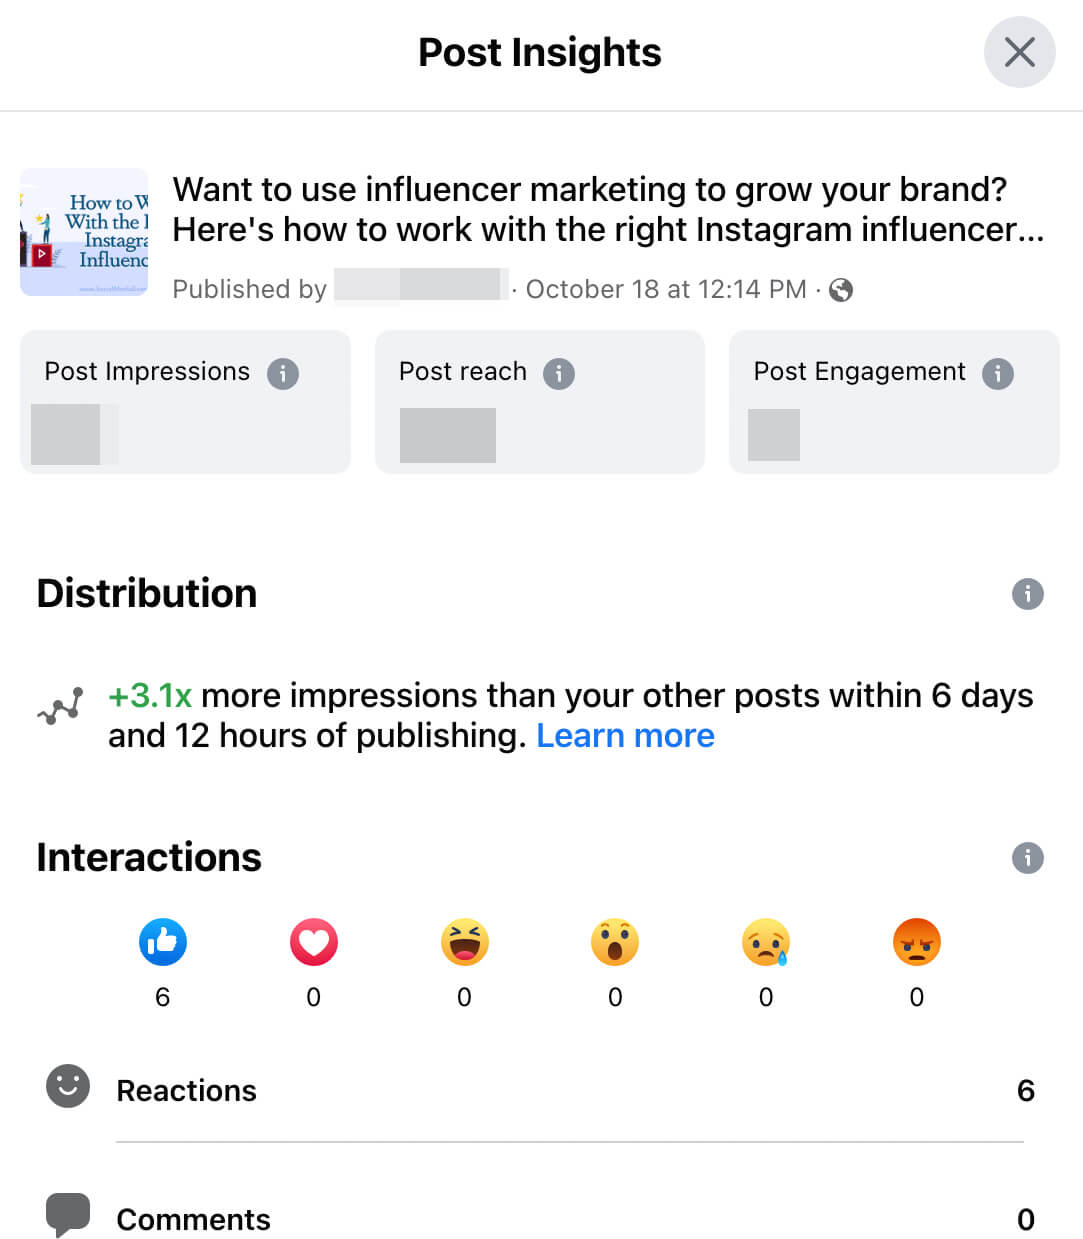 how-to-find-page-insights-for-the-new-pages-experience-on-facebook-npe-post-insights-reach-engagement-distribution-for-each-post-create-effective-content-example-23